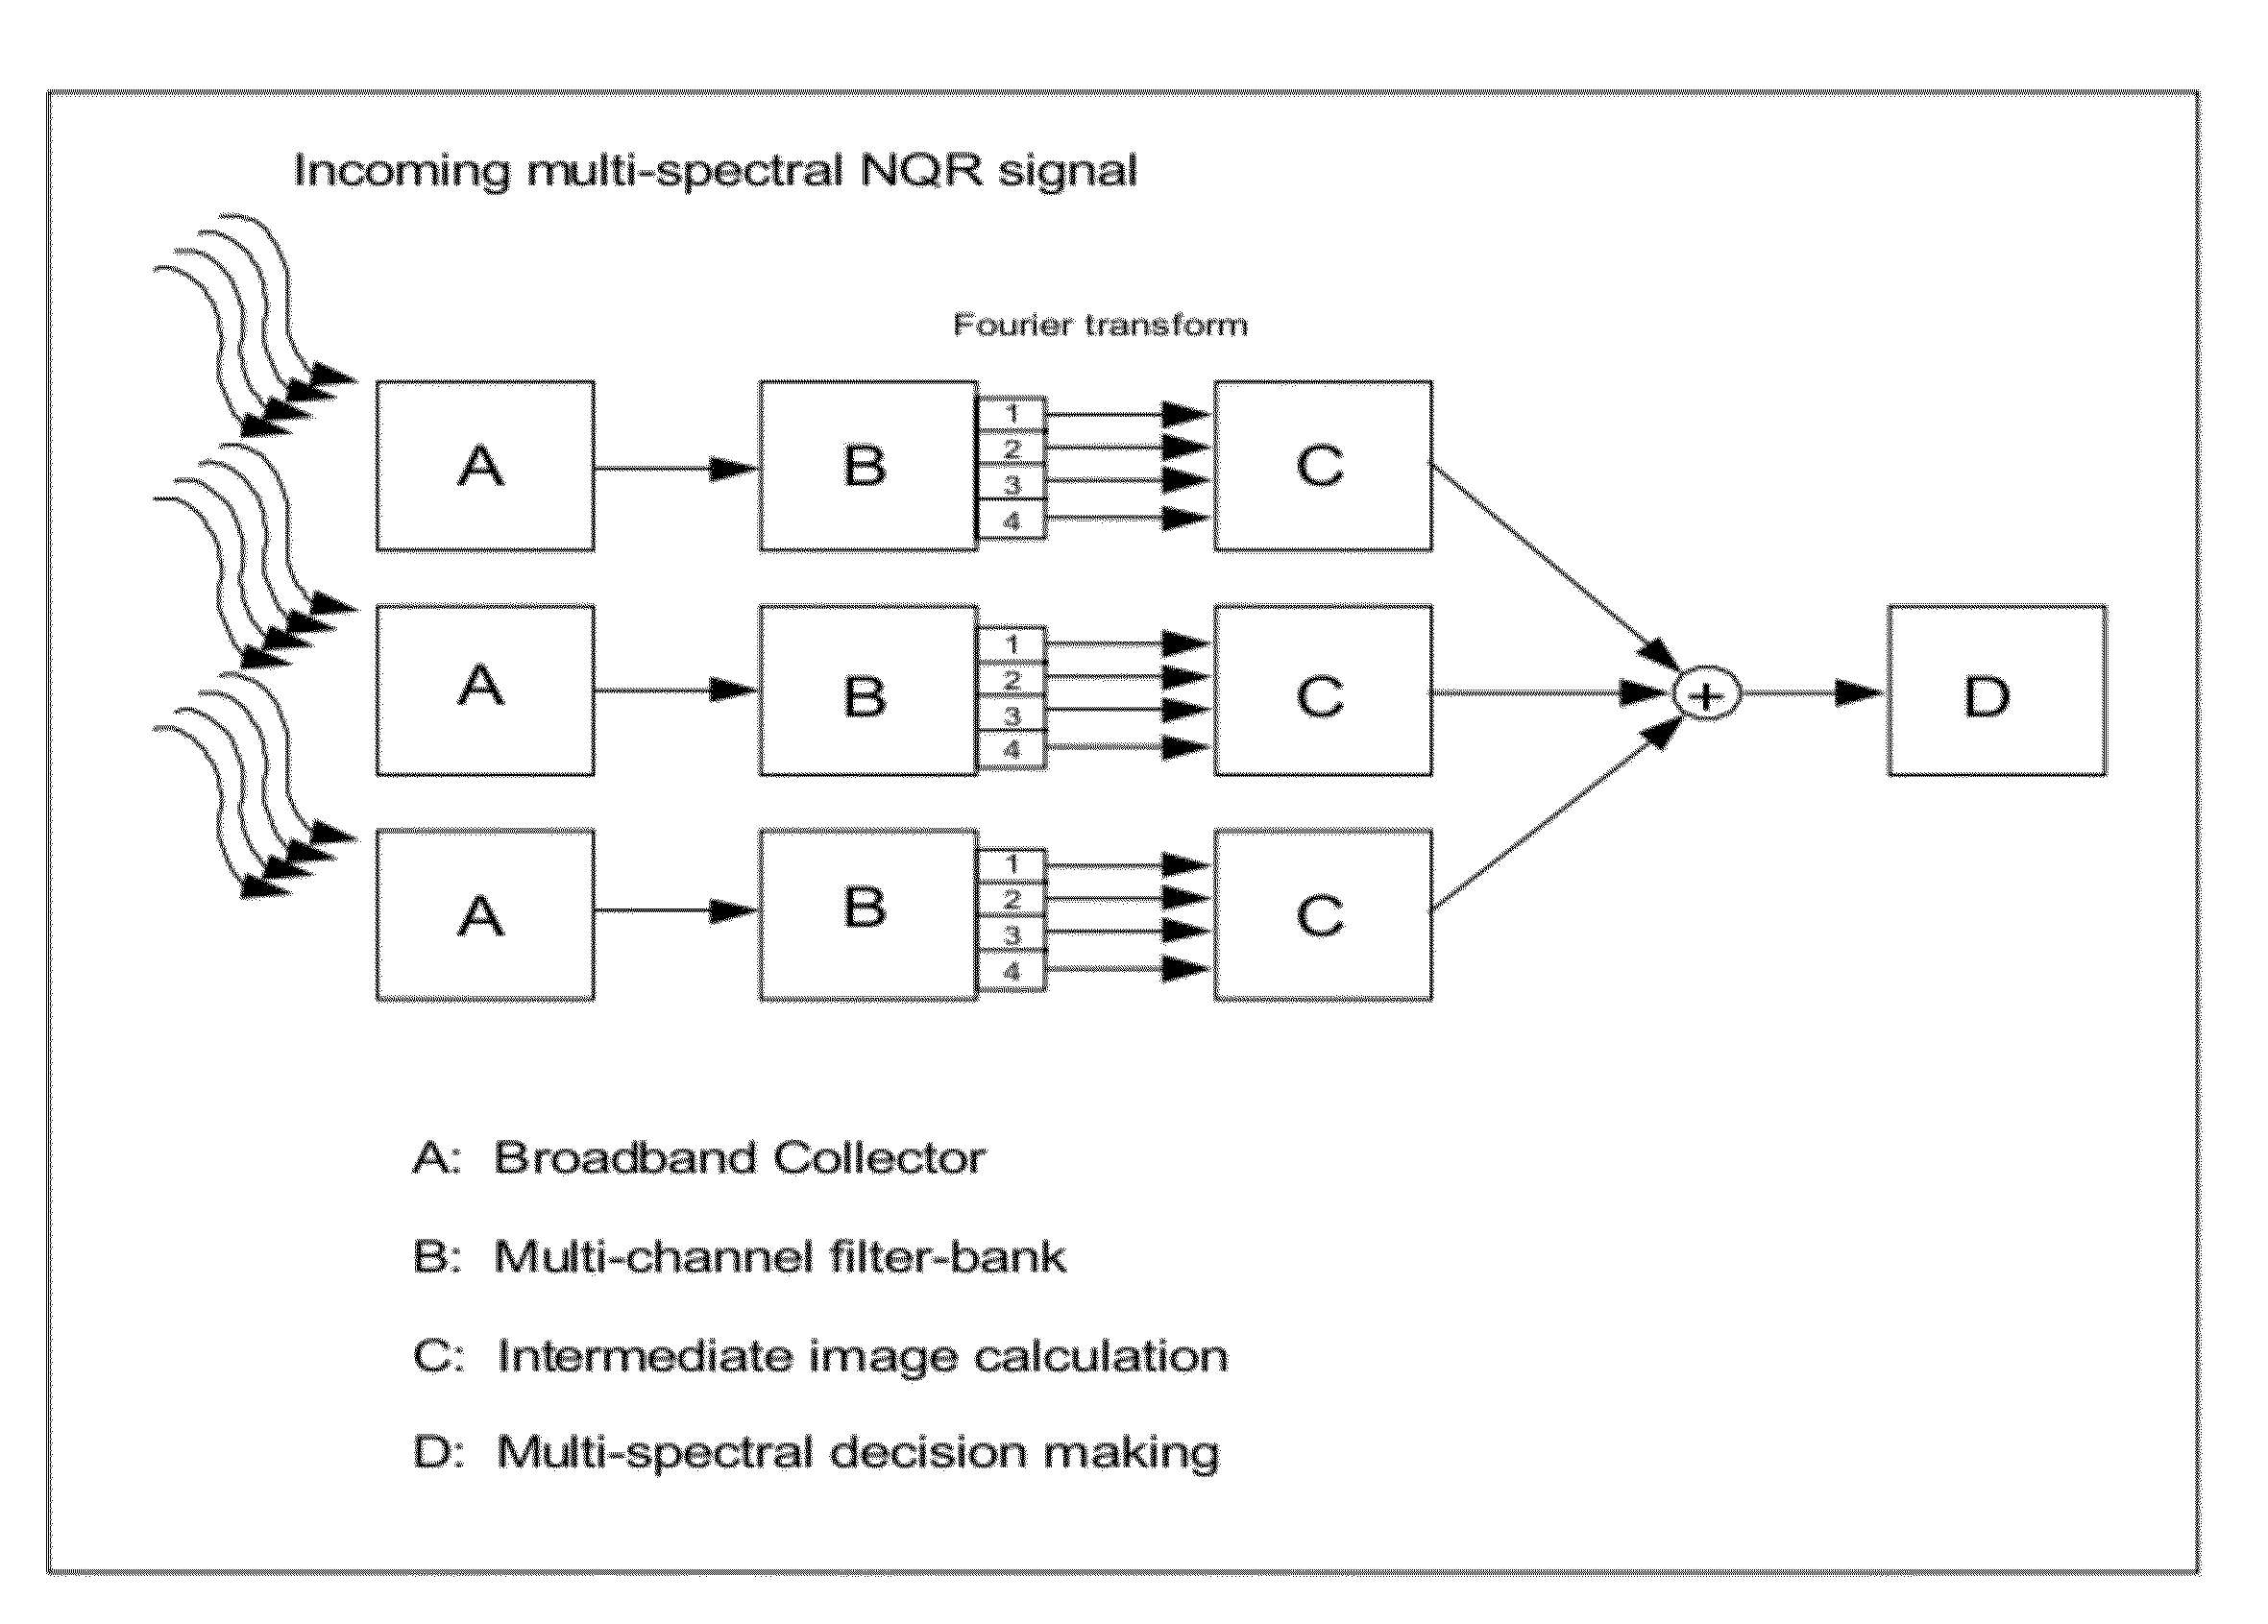 Noise reduction apparatus, systems, and methods